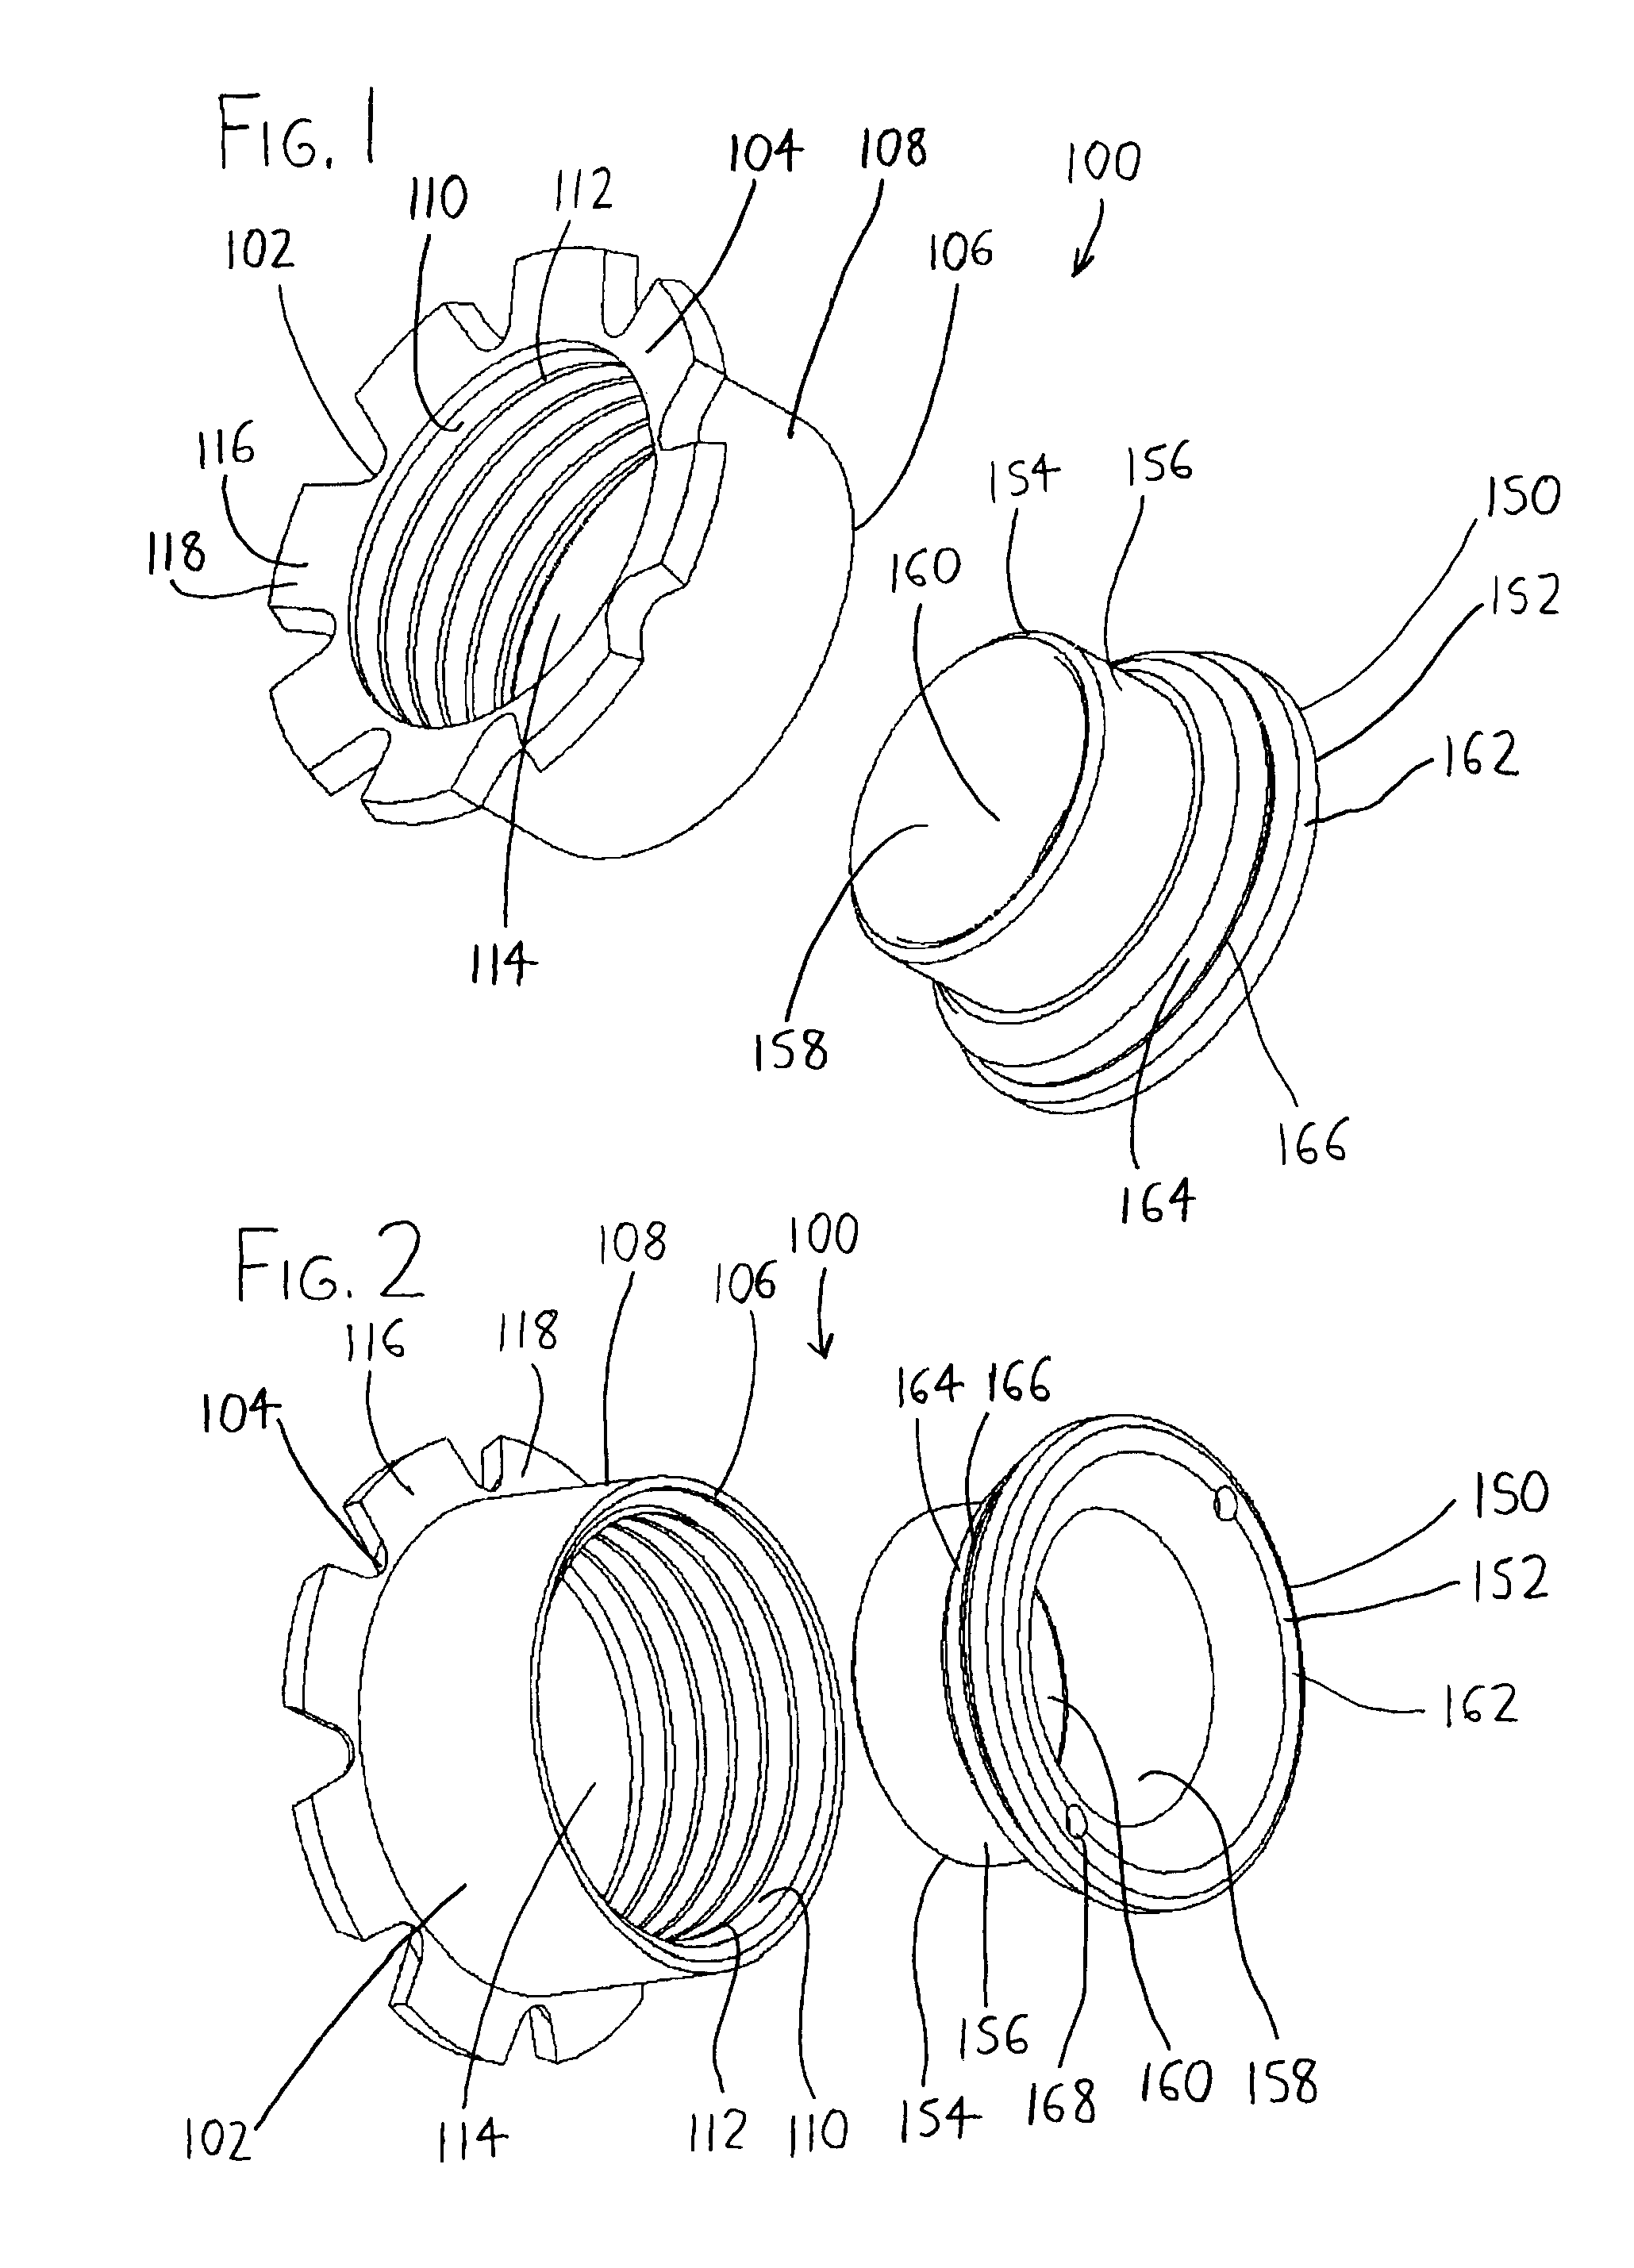 Connector / bushing assembly for electrical junction boxes